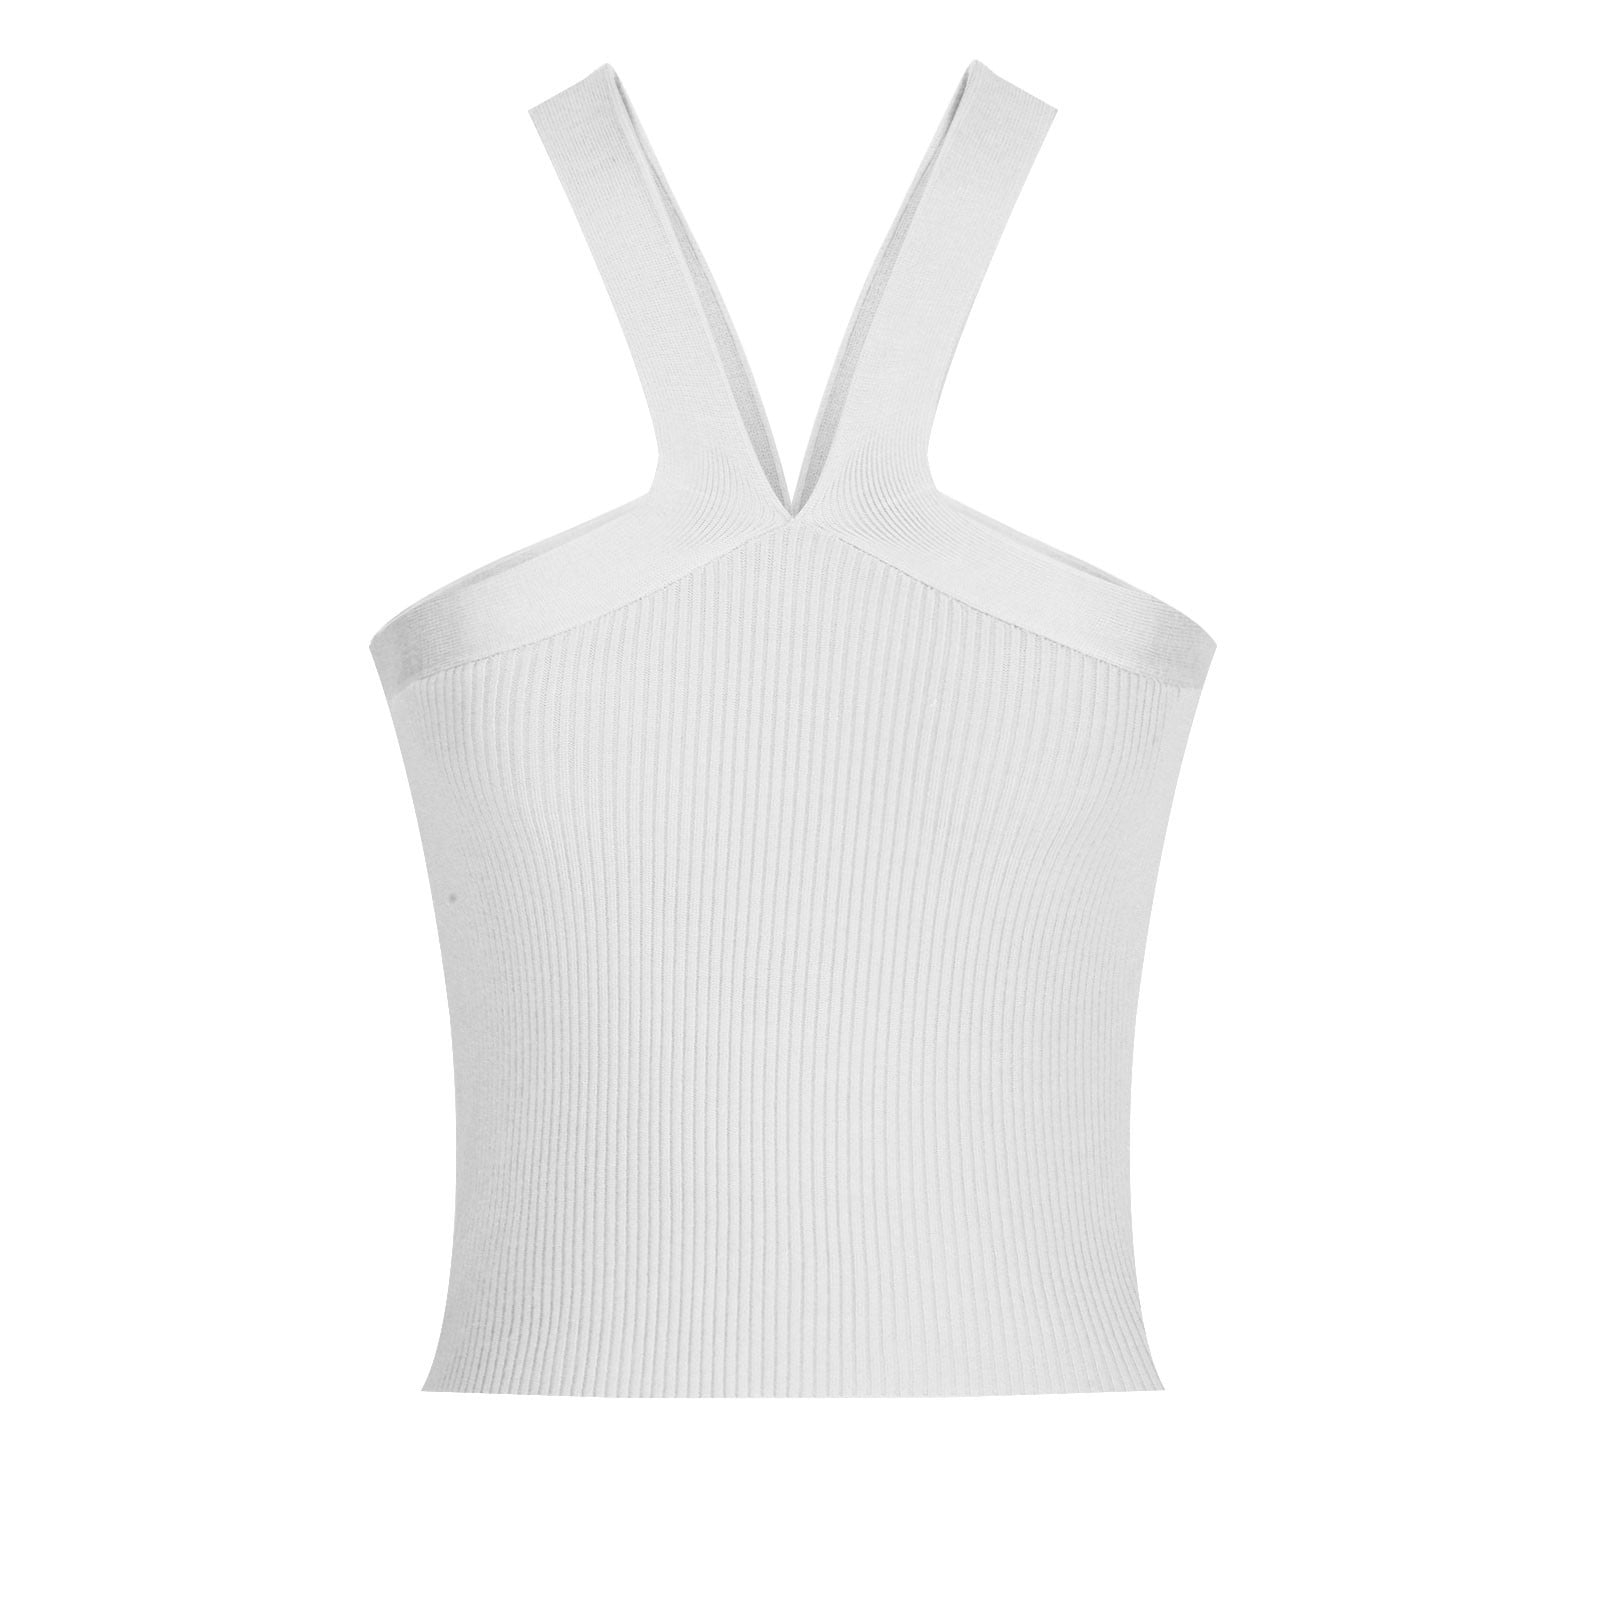 YYDGH Women's Criss Cross Halter Crop Top Ribbed Knit Fitting Tank Top  Solid Color Sleeveless Tee Shirt Summmer Tops White XL 